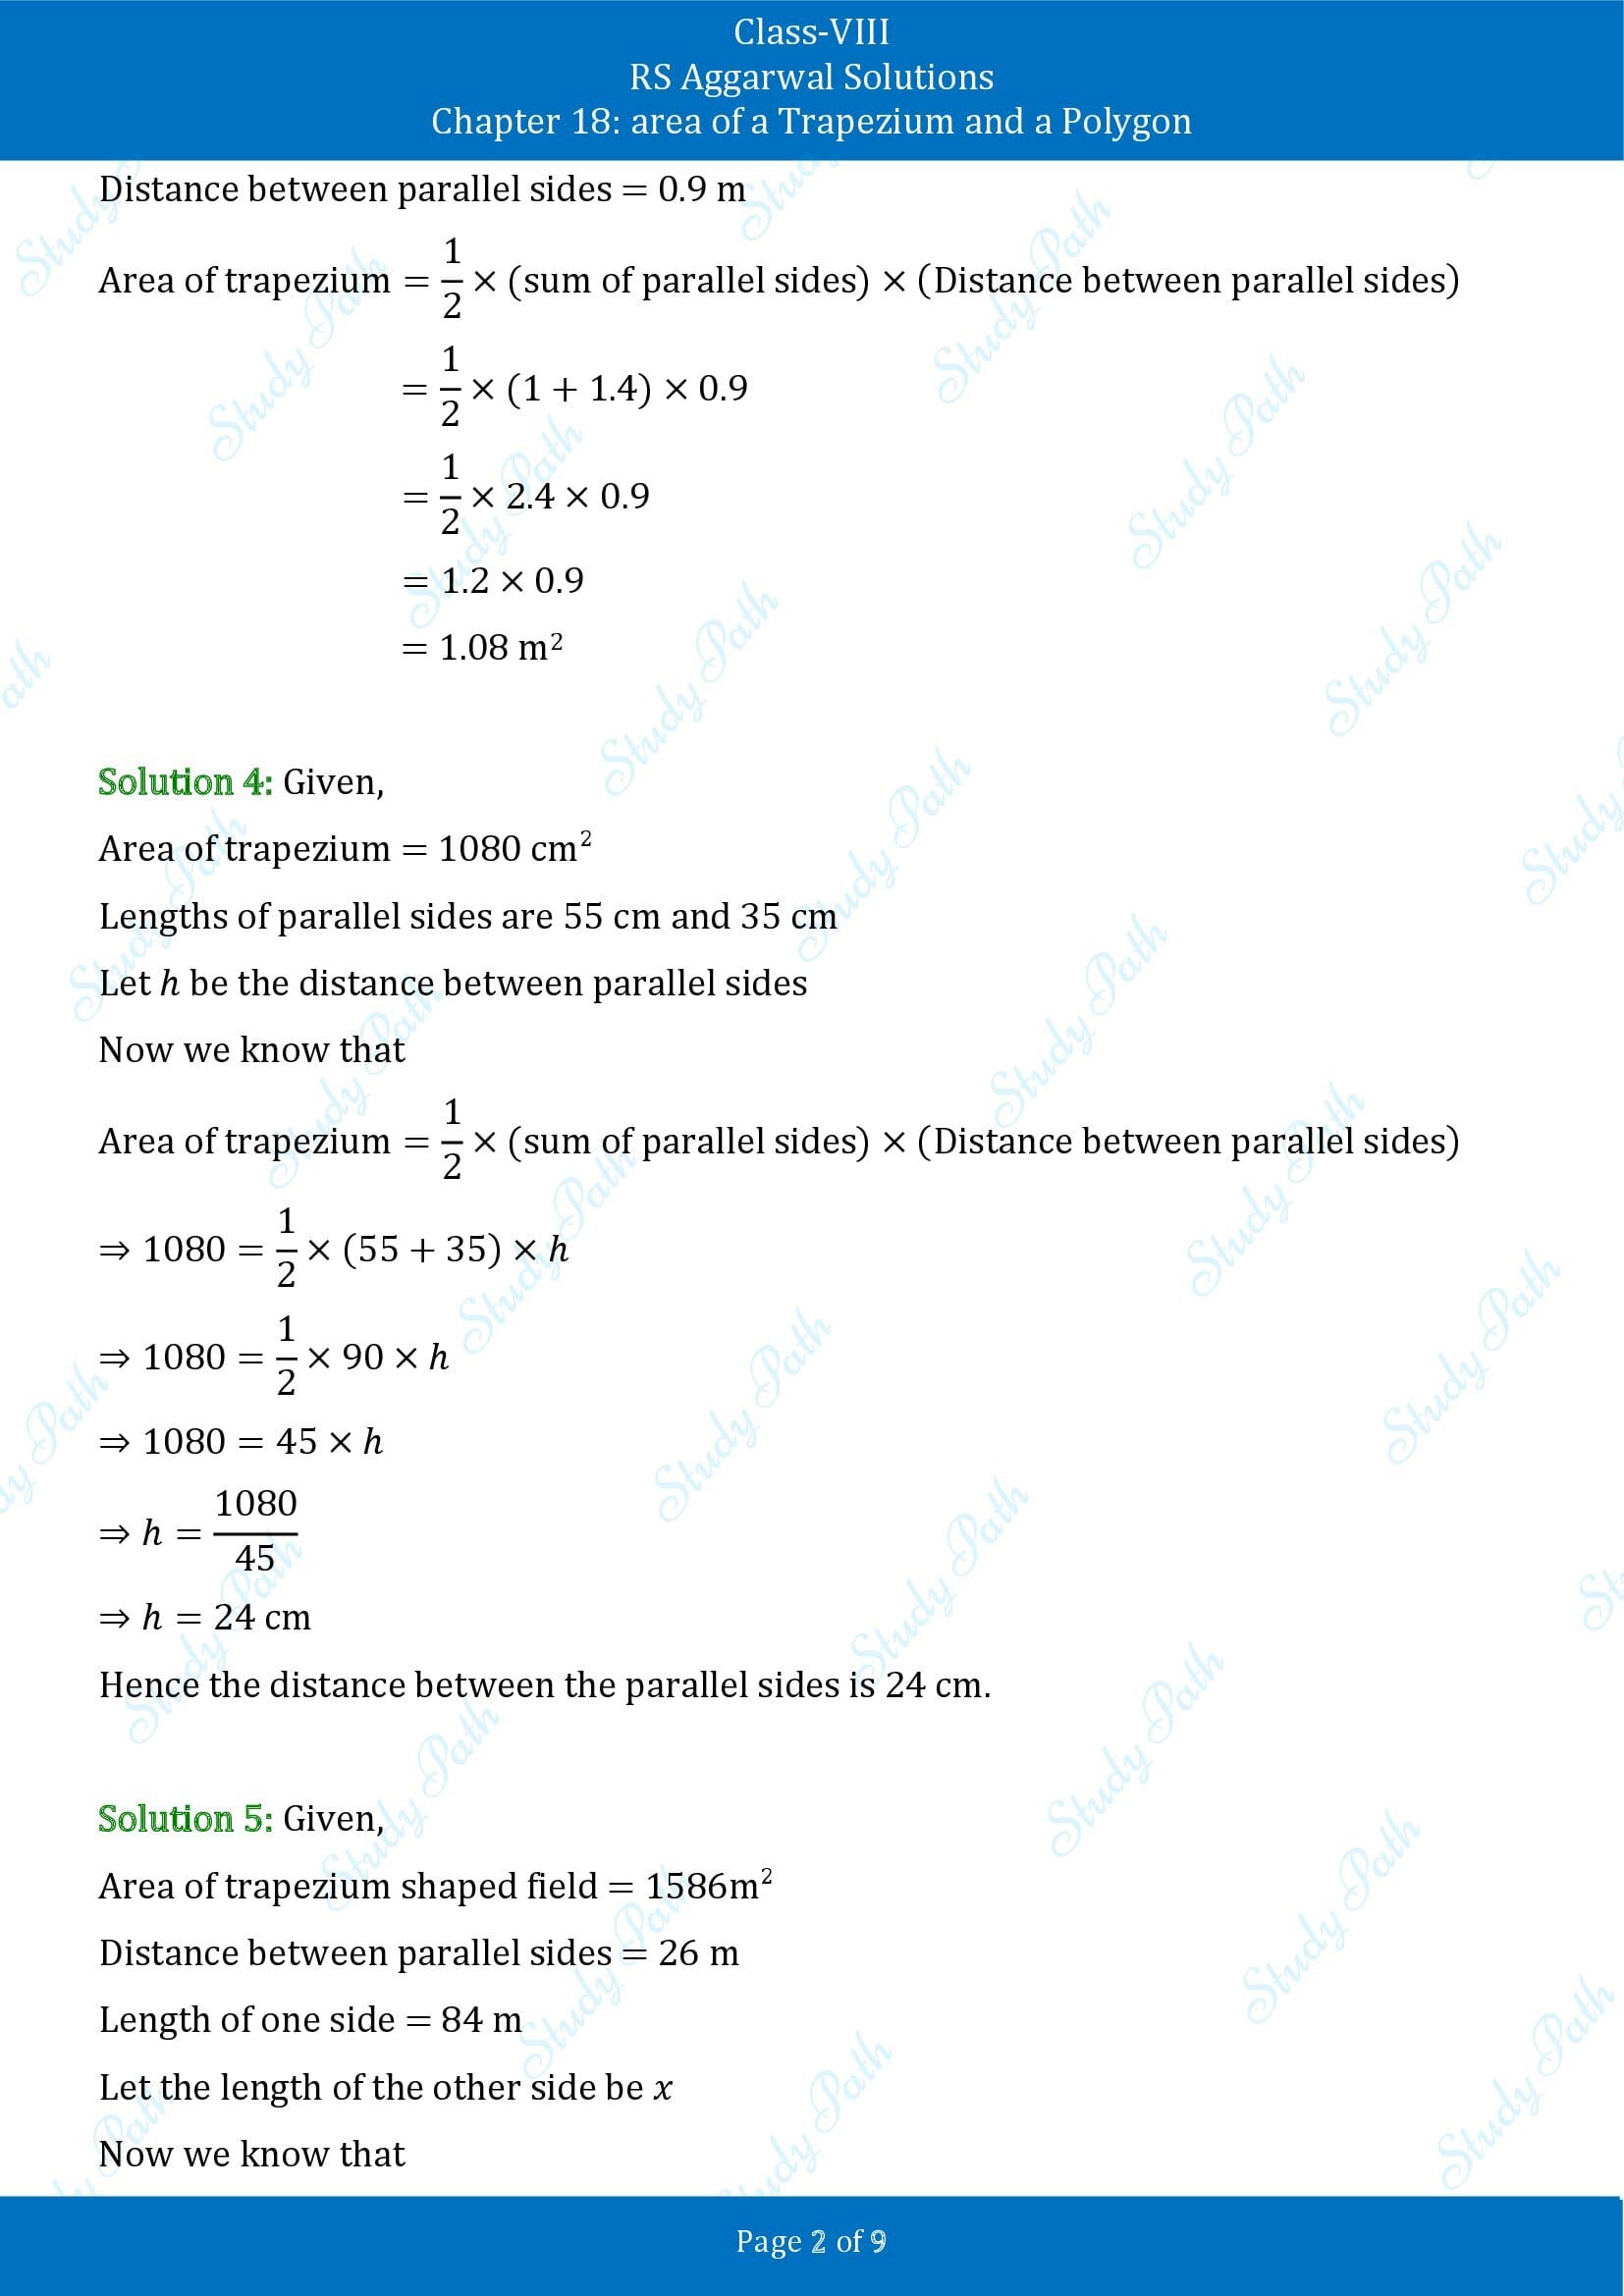 RS Aggarwal Solutions Class 8 Chapter 18 Area of a Trapezium and a Polygon Exercise 18A 00002